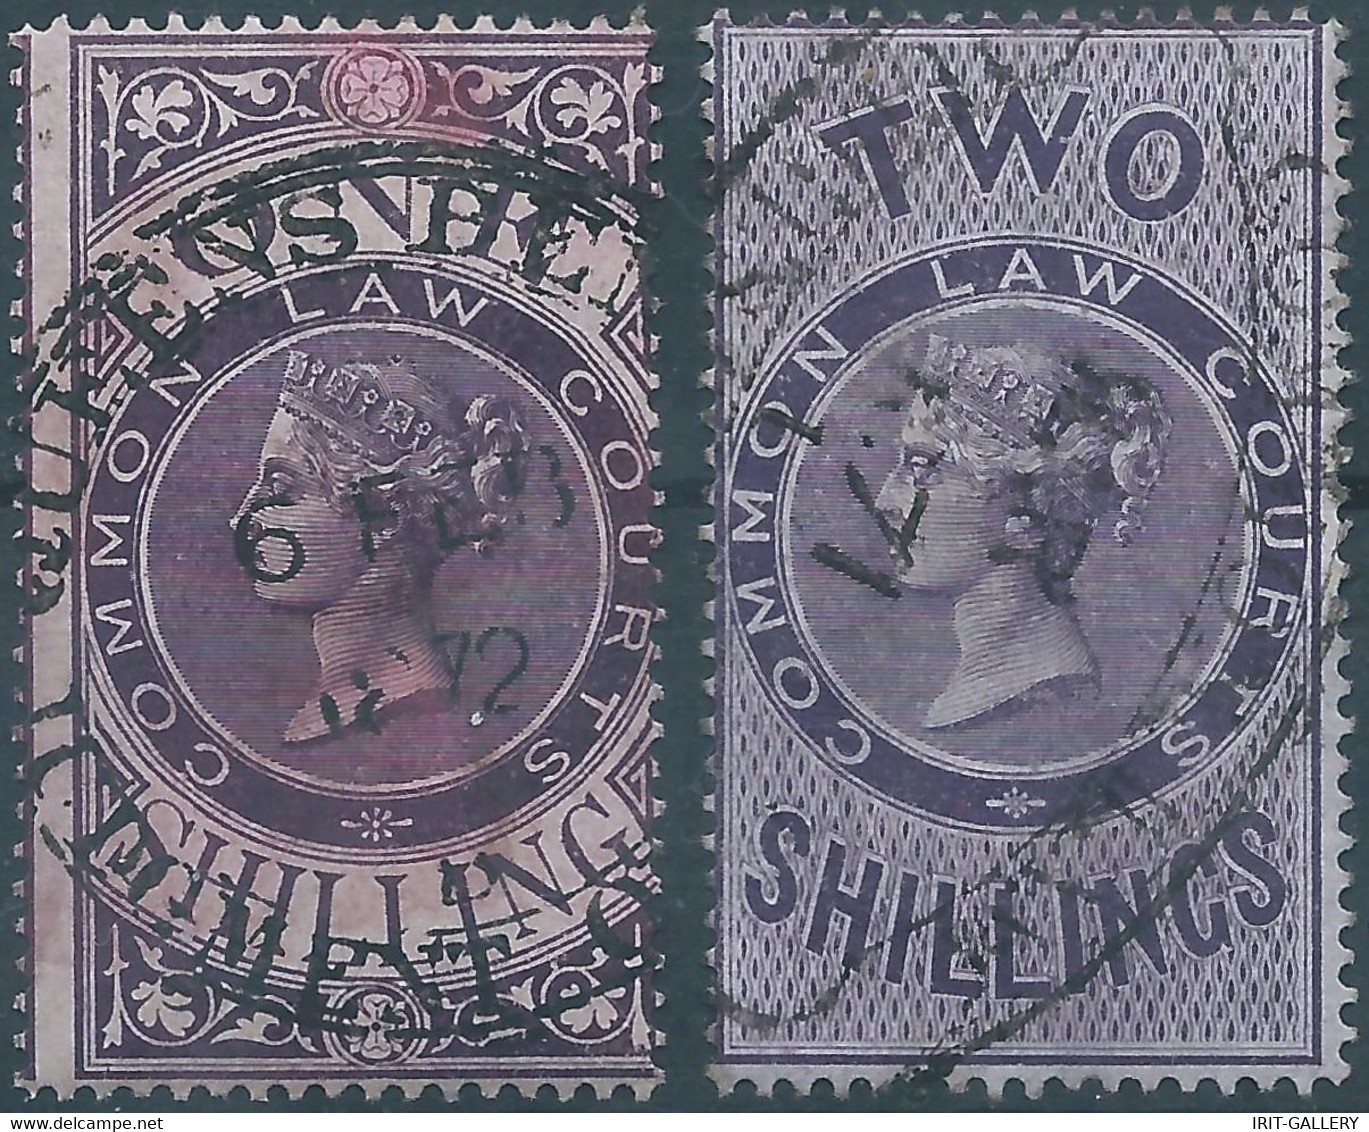 Great Britain-ENGLAND,Queen Victoria,1871-1872 Revenue Stamps Tax Fiscal COMMON LAW COURTS,1 & 2 Shillings,Used - Fiscaux